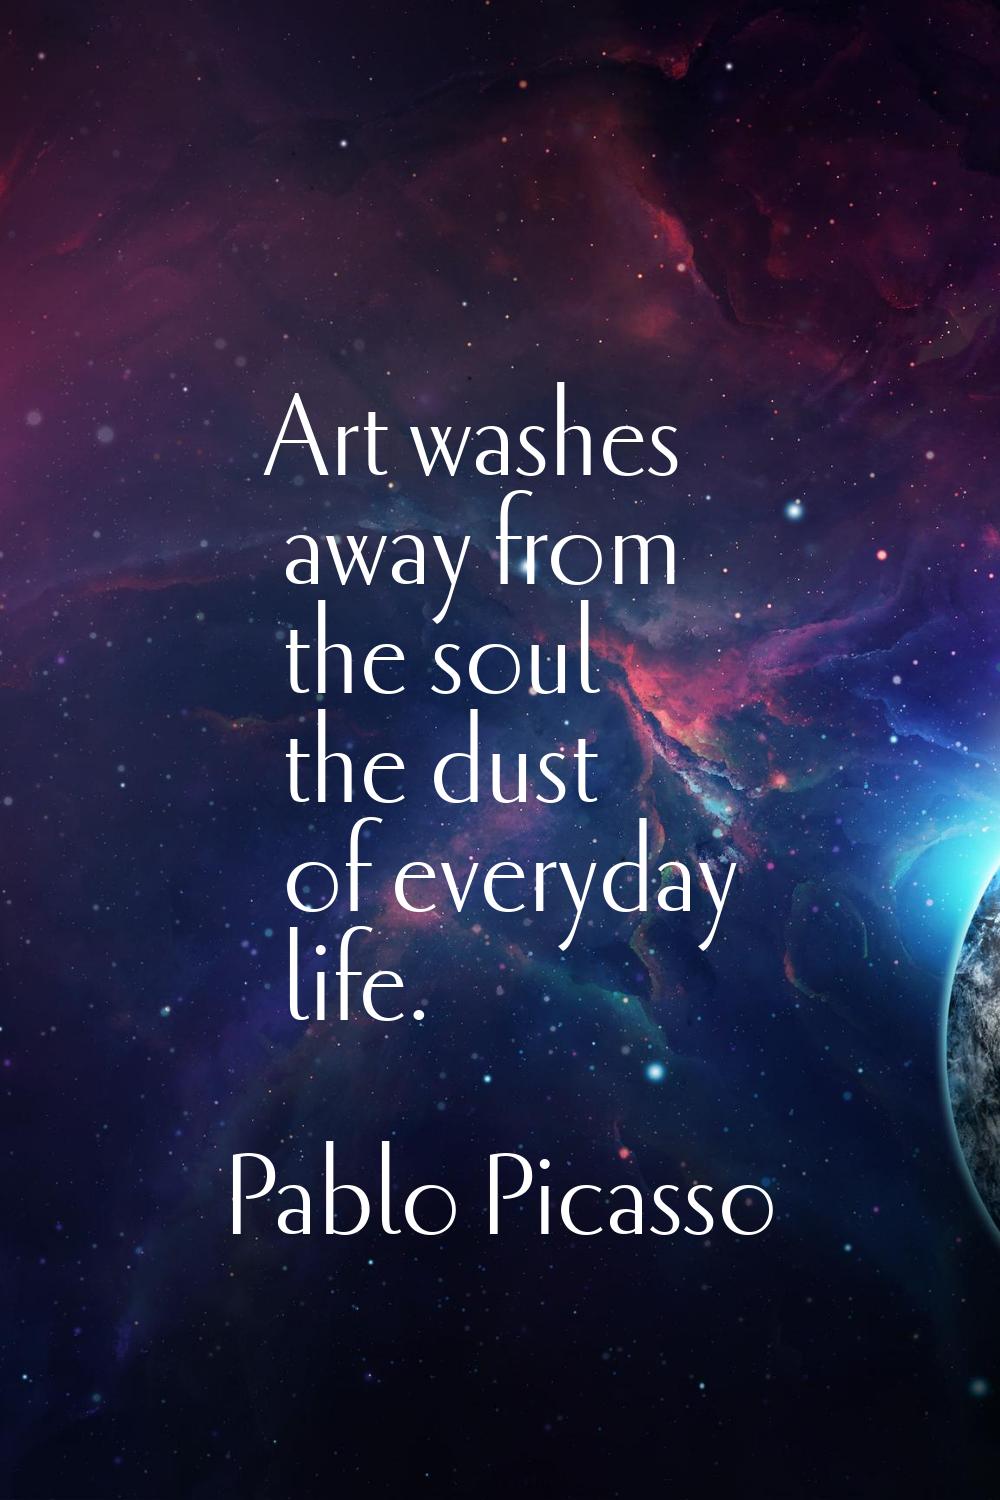 Art washes away from the soul the dust of everyday life.